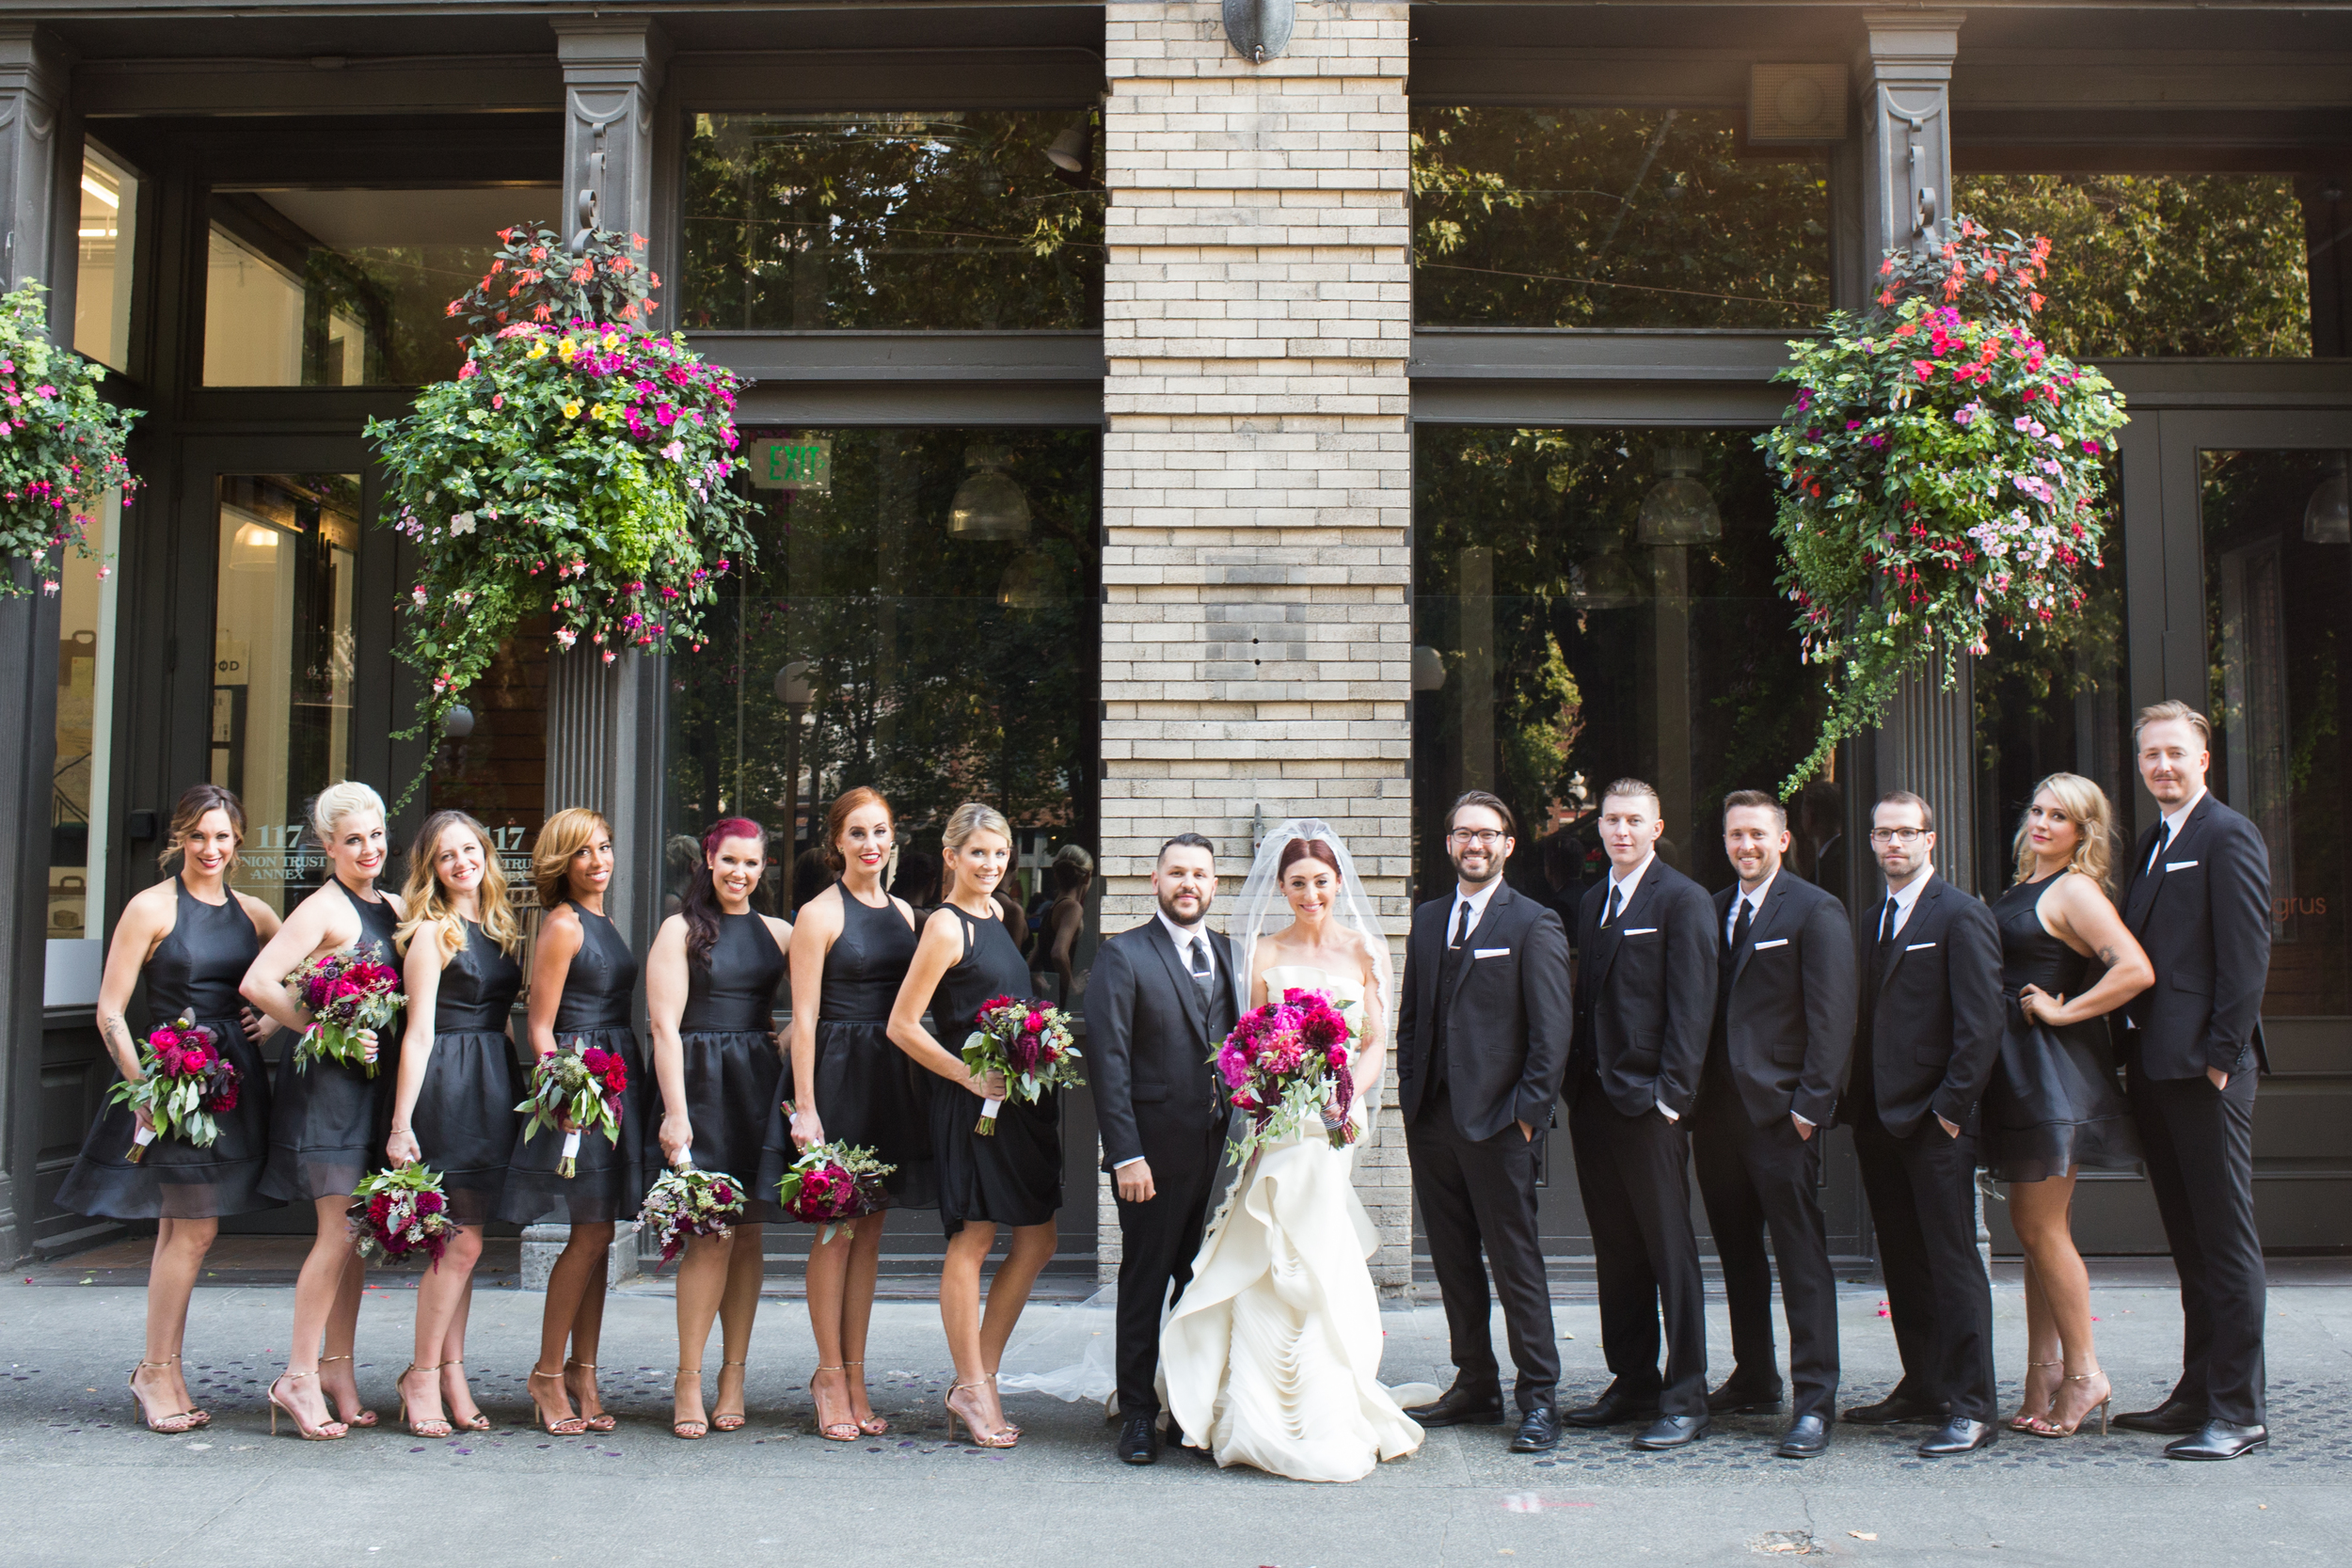 Bridal Party Portrait | Axis Pioneer Square Wedding | Angela and Evan Photography | Seattle Wedding Planner